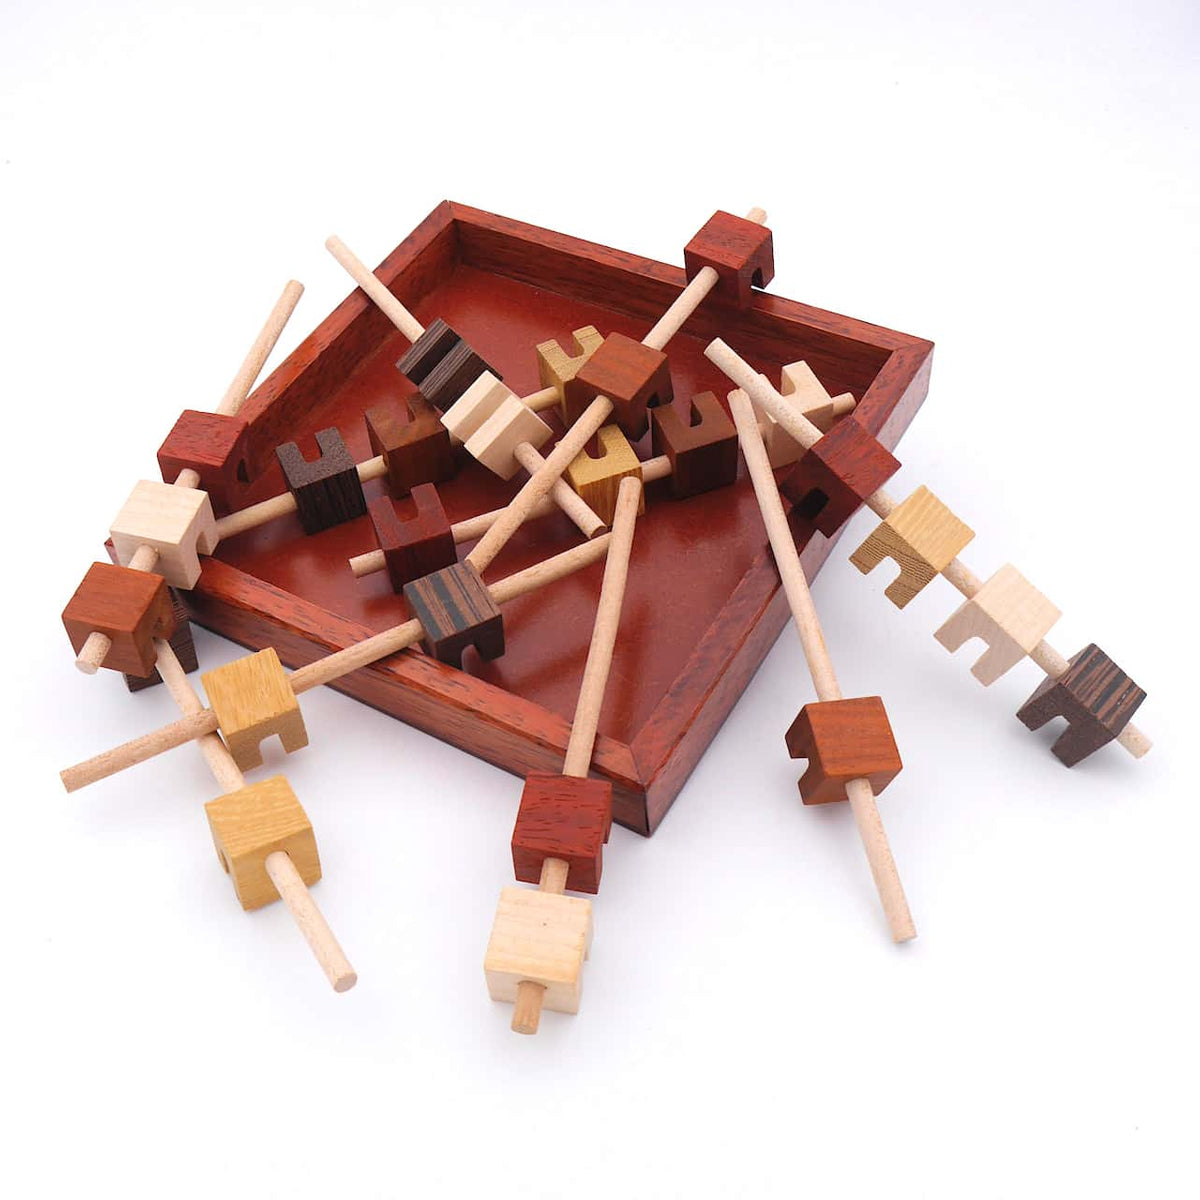 BROCHETTES - großes, edles Packpuzzle